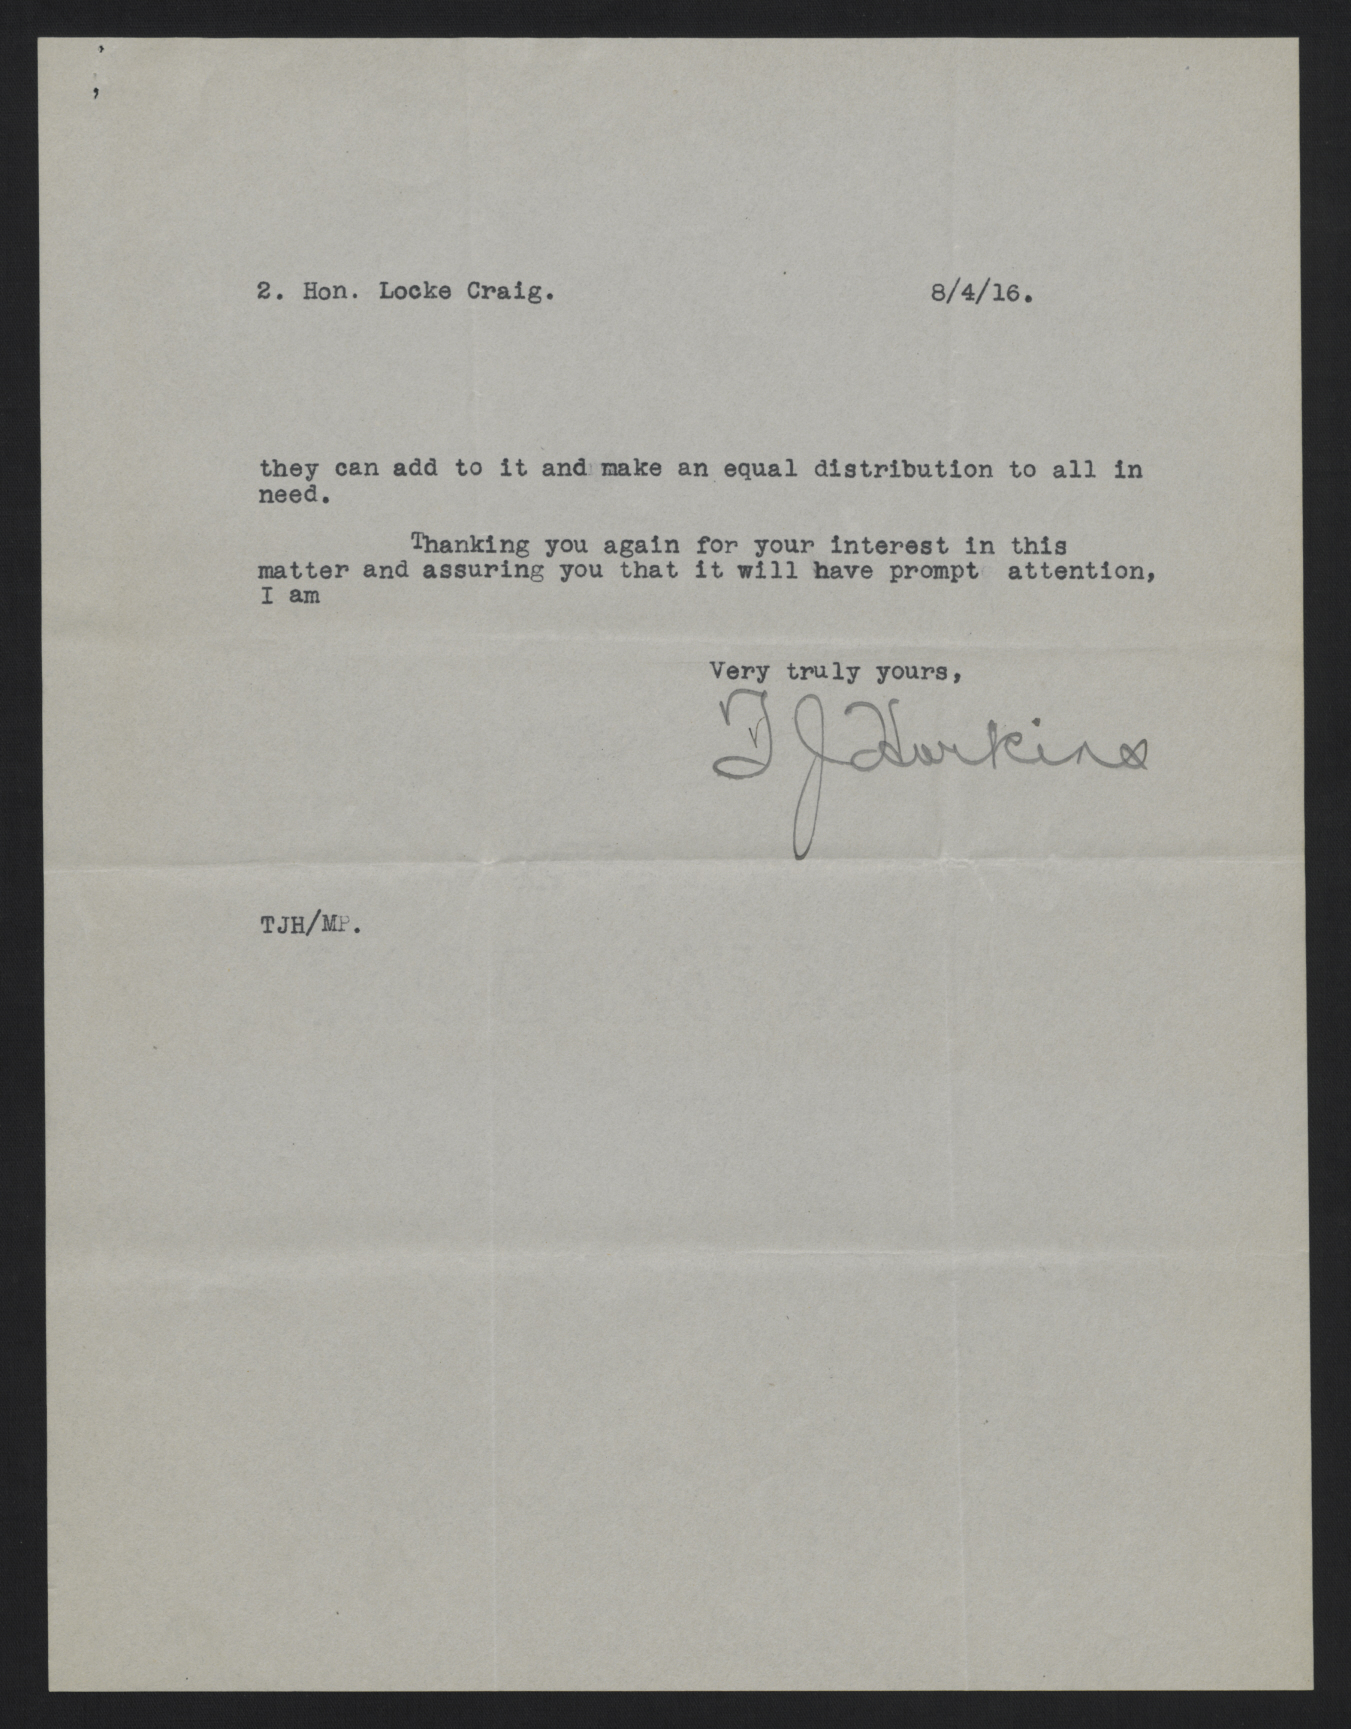 Letter from Harkins to Craig, August 4, 1916, page 2